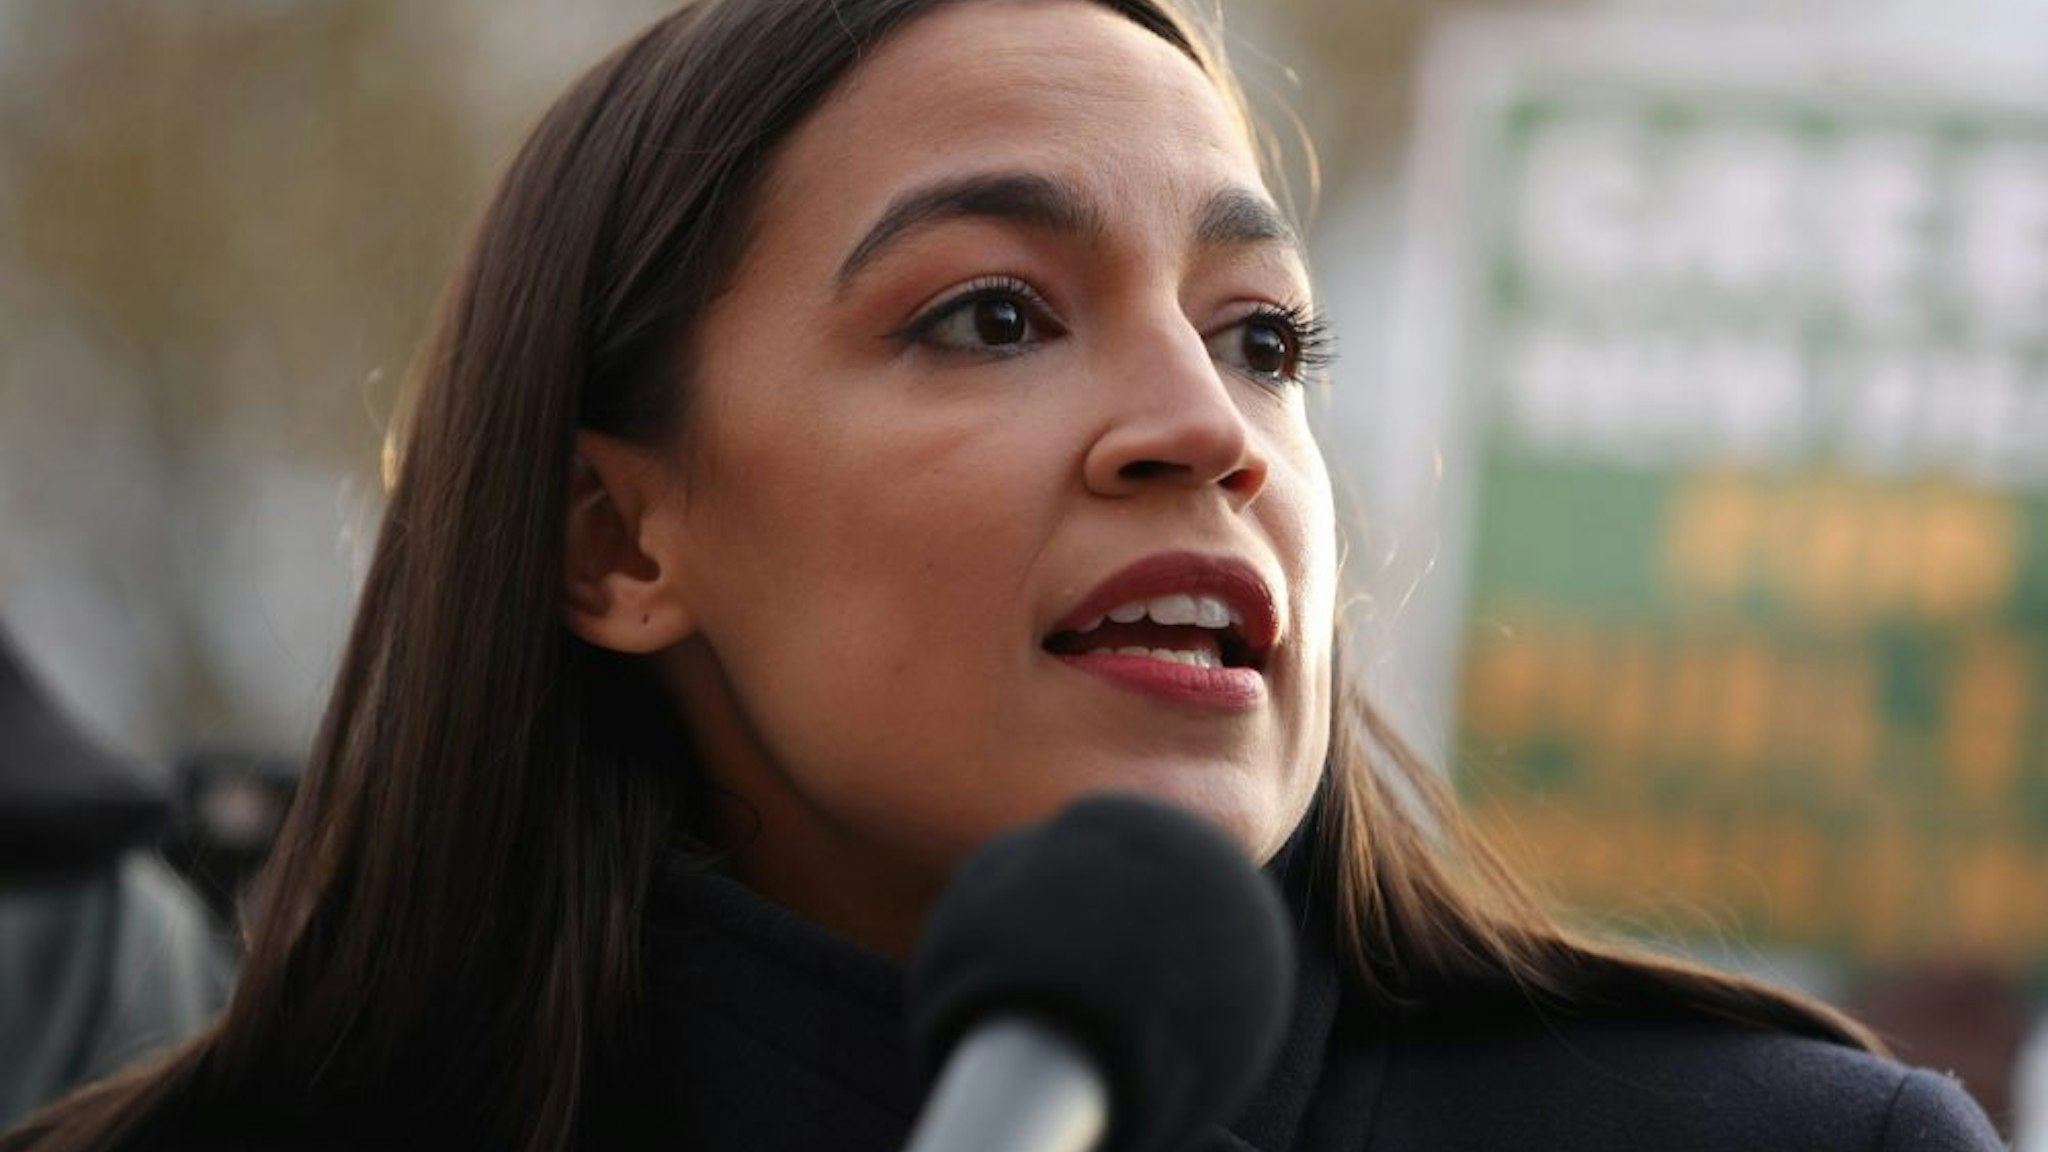 WASHINGTON, DC - NOVEMBER 14: Rep. Alexandria Ocasio-Cortez (D-NY) speaks during a news conference to introduce legislation to transform public housing as part of her Green New Deal outside the U.S. Capitol November 14, 2019 in Washington, DC. The liberal legislators invited affordable housing advocates and climate change activists to join them for the announcement.